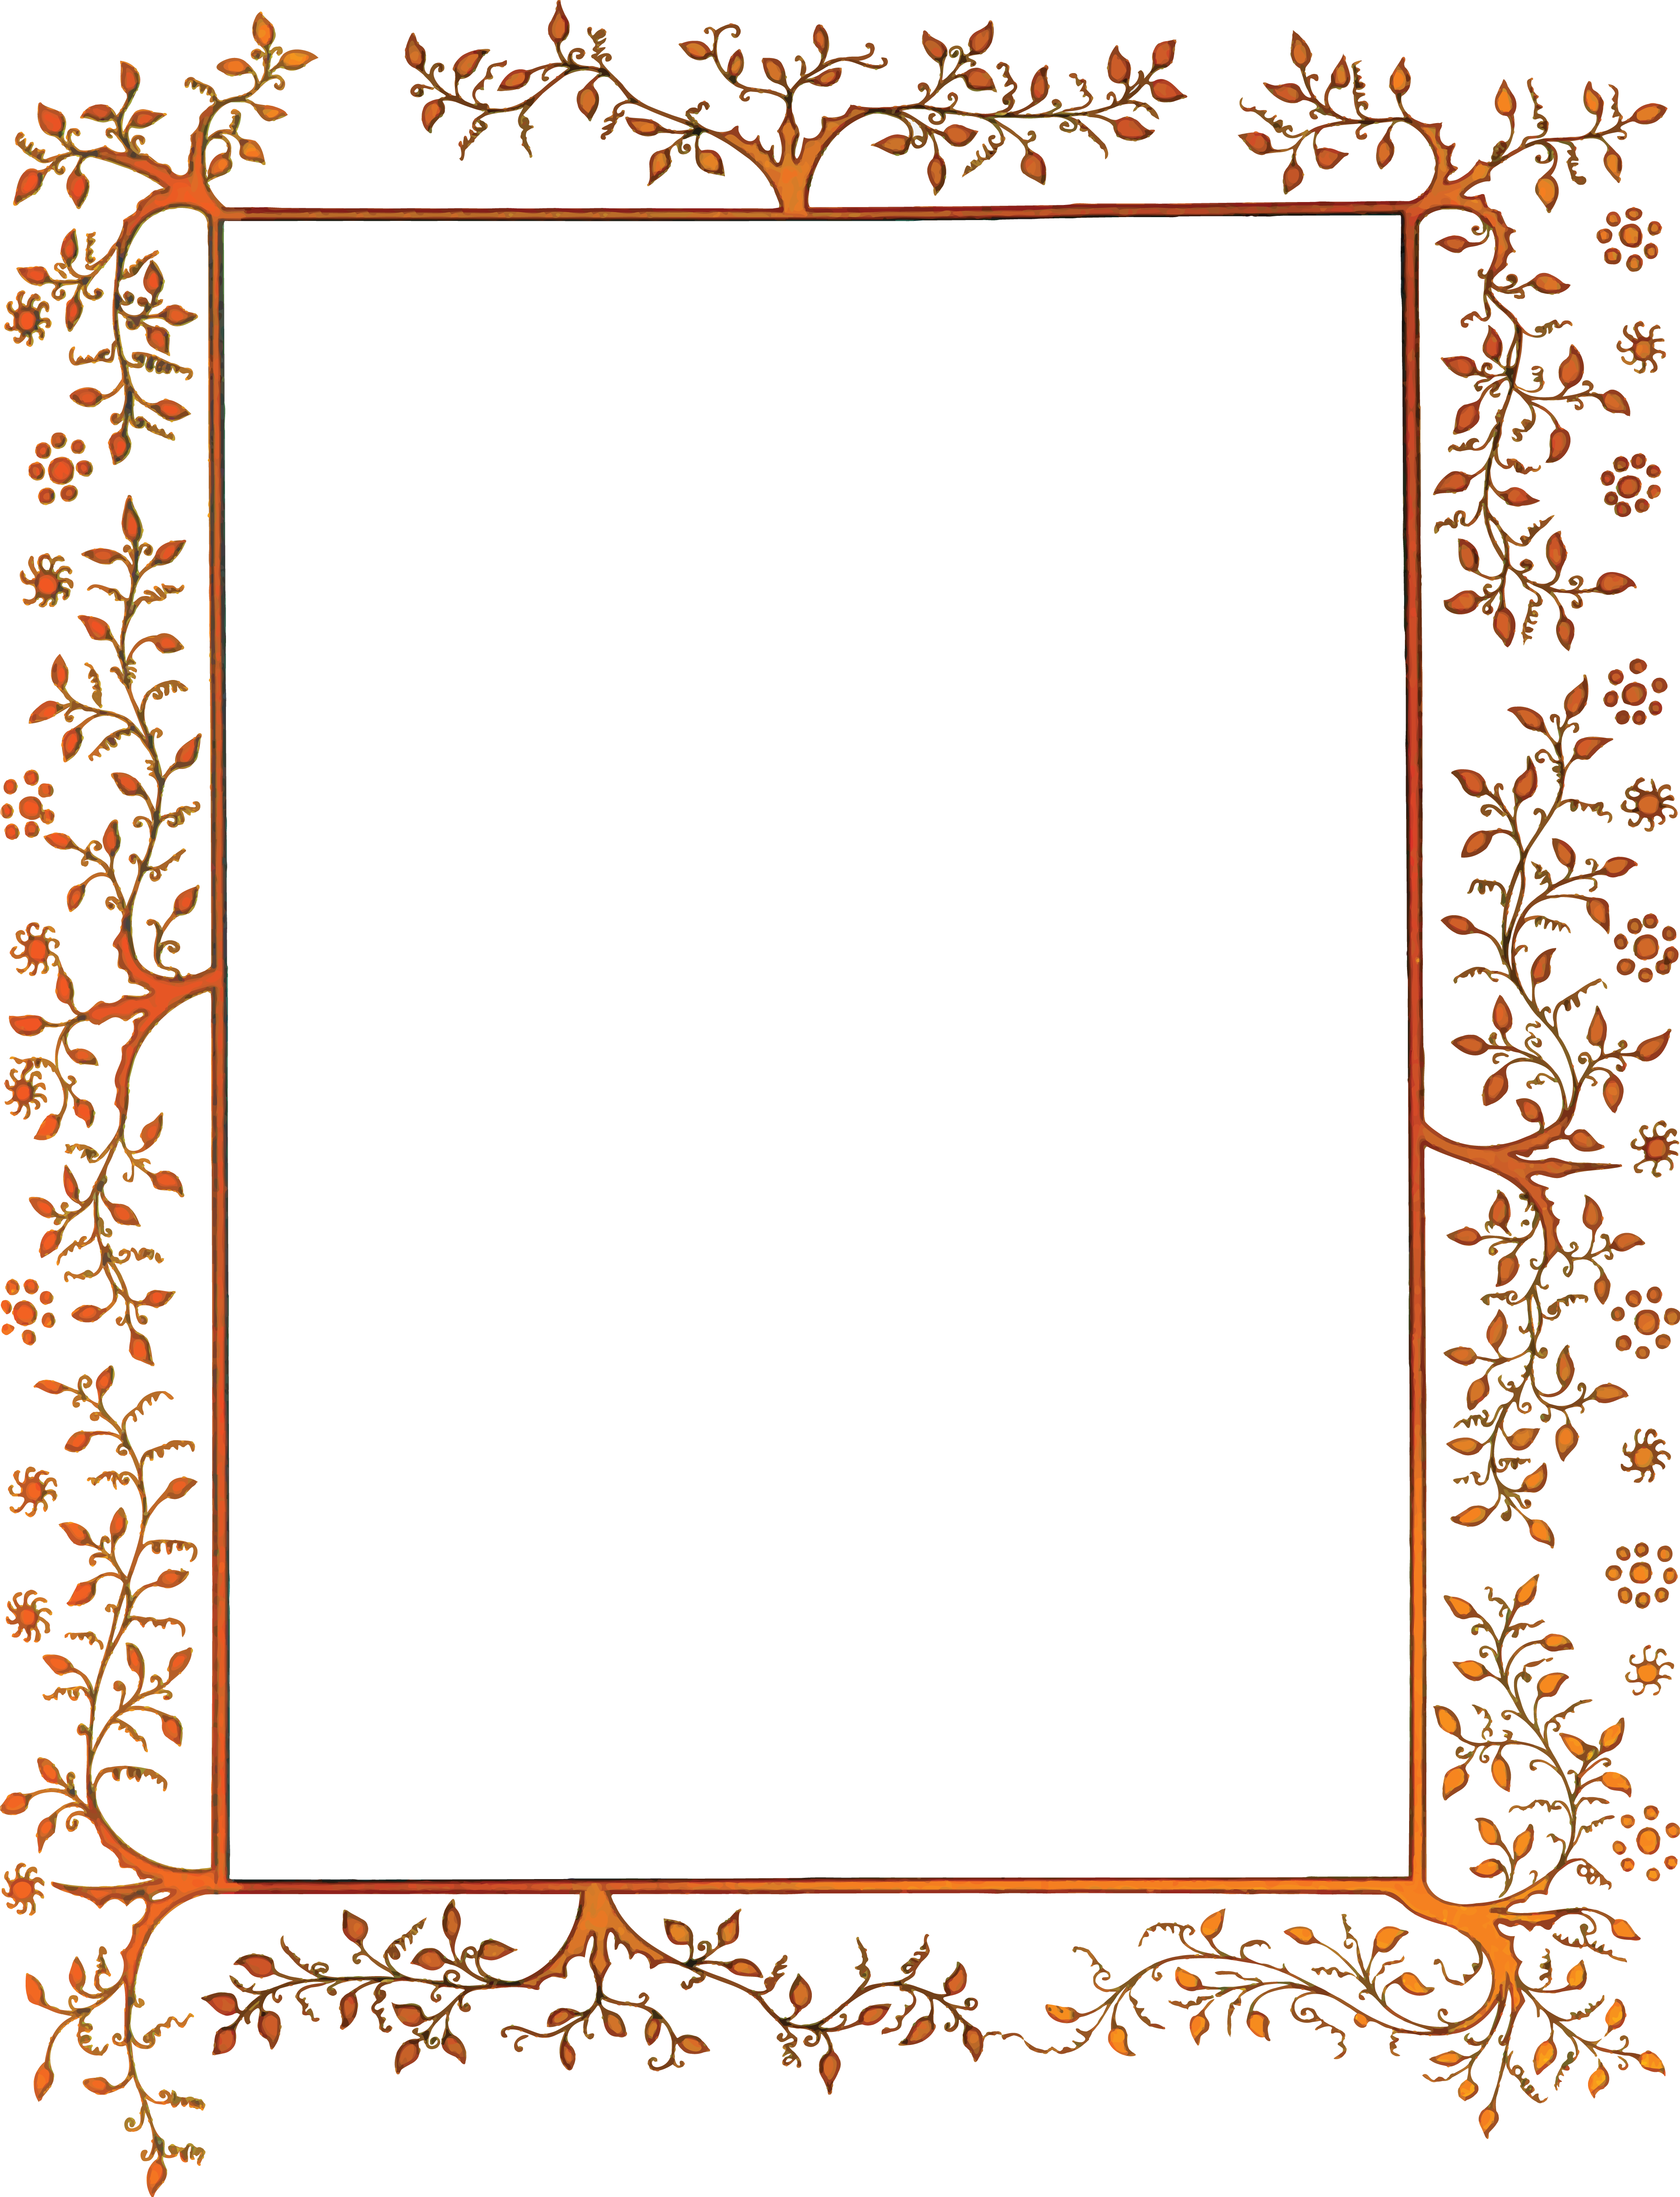  free clipart of. Decorative border png